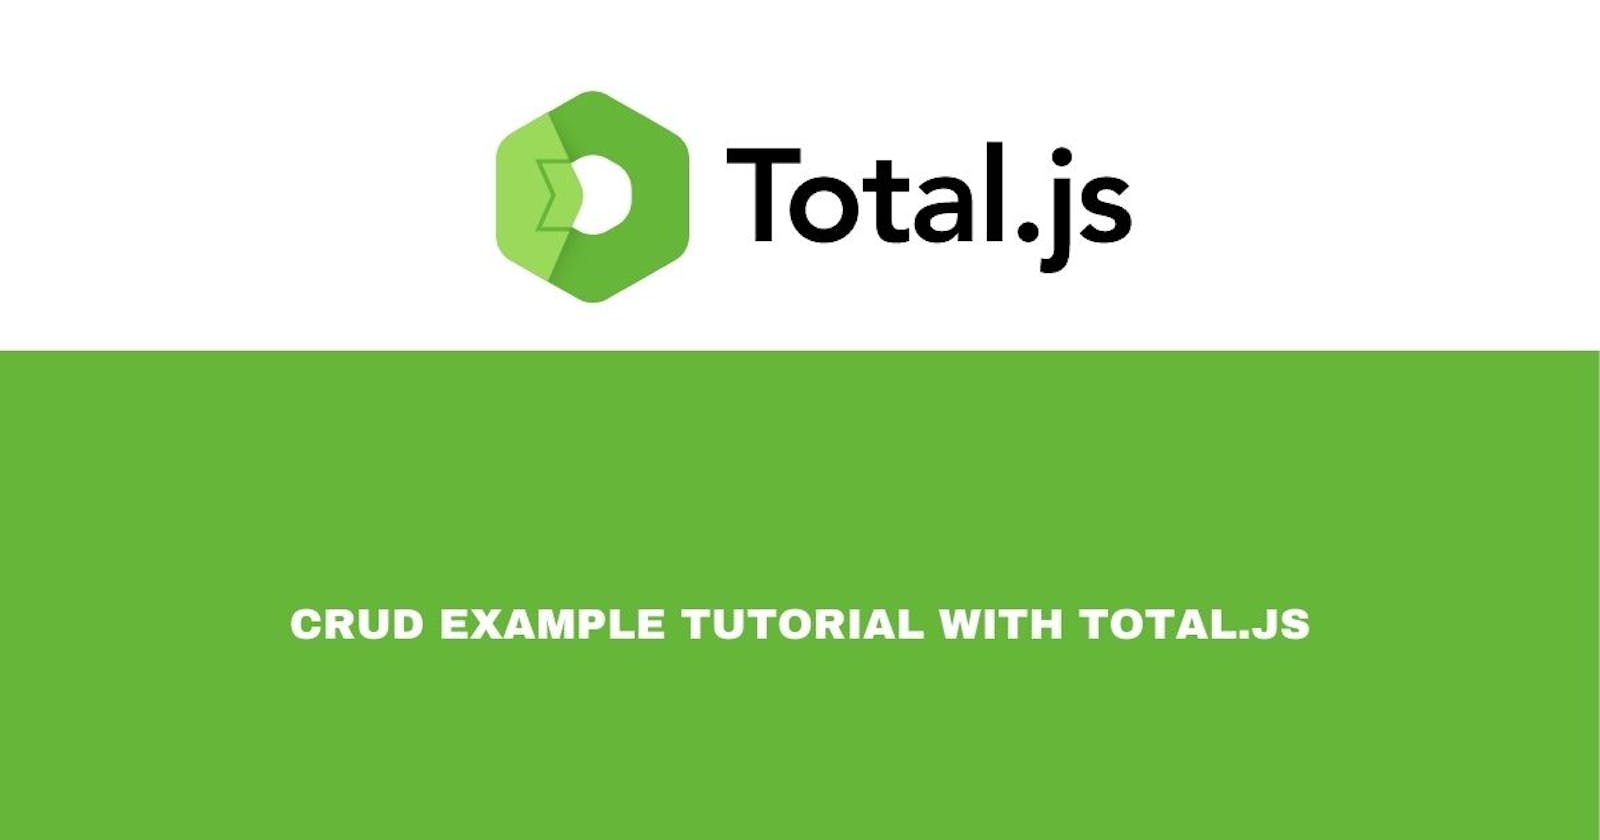 Blog post tutorial with total.js (part 3 end)